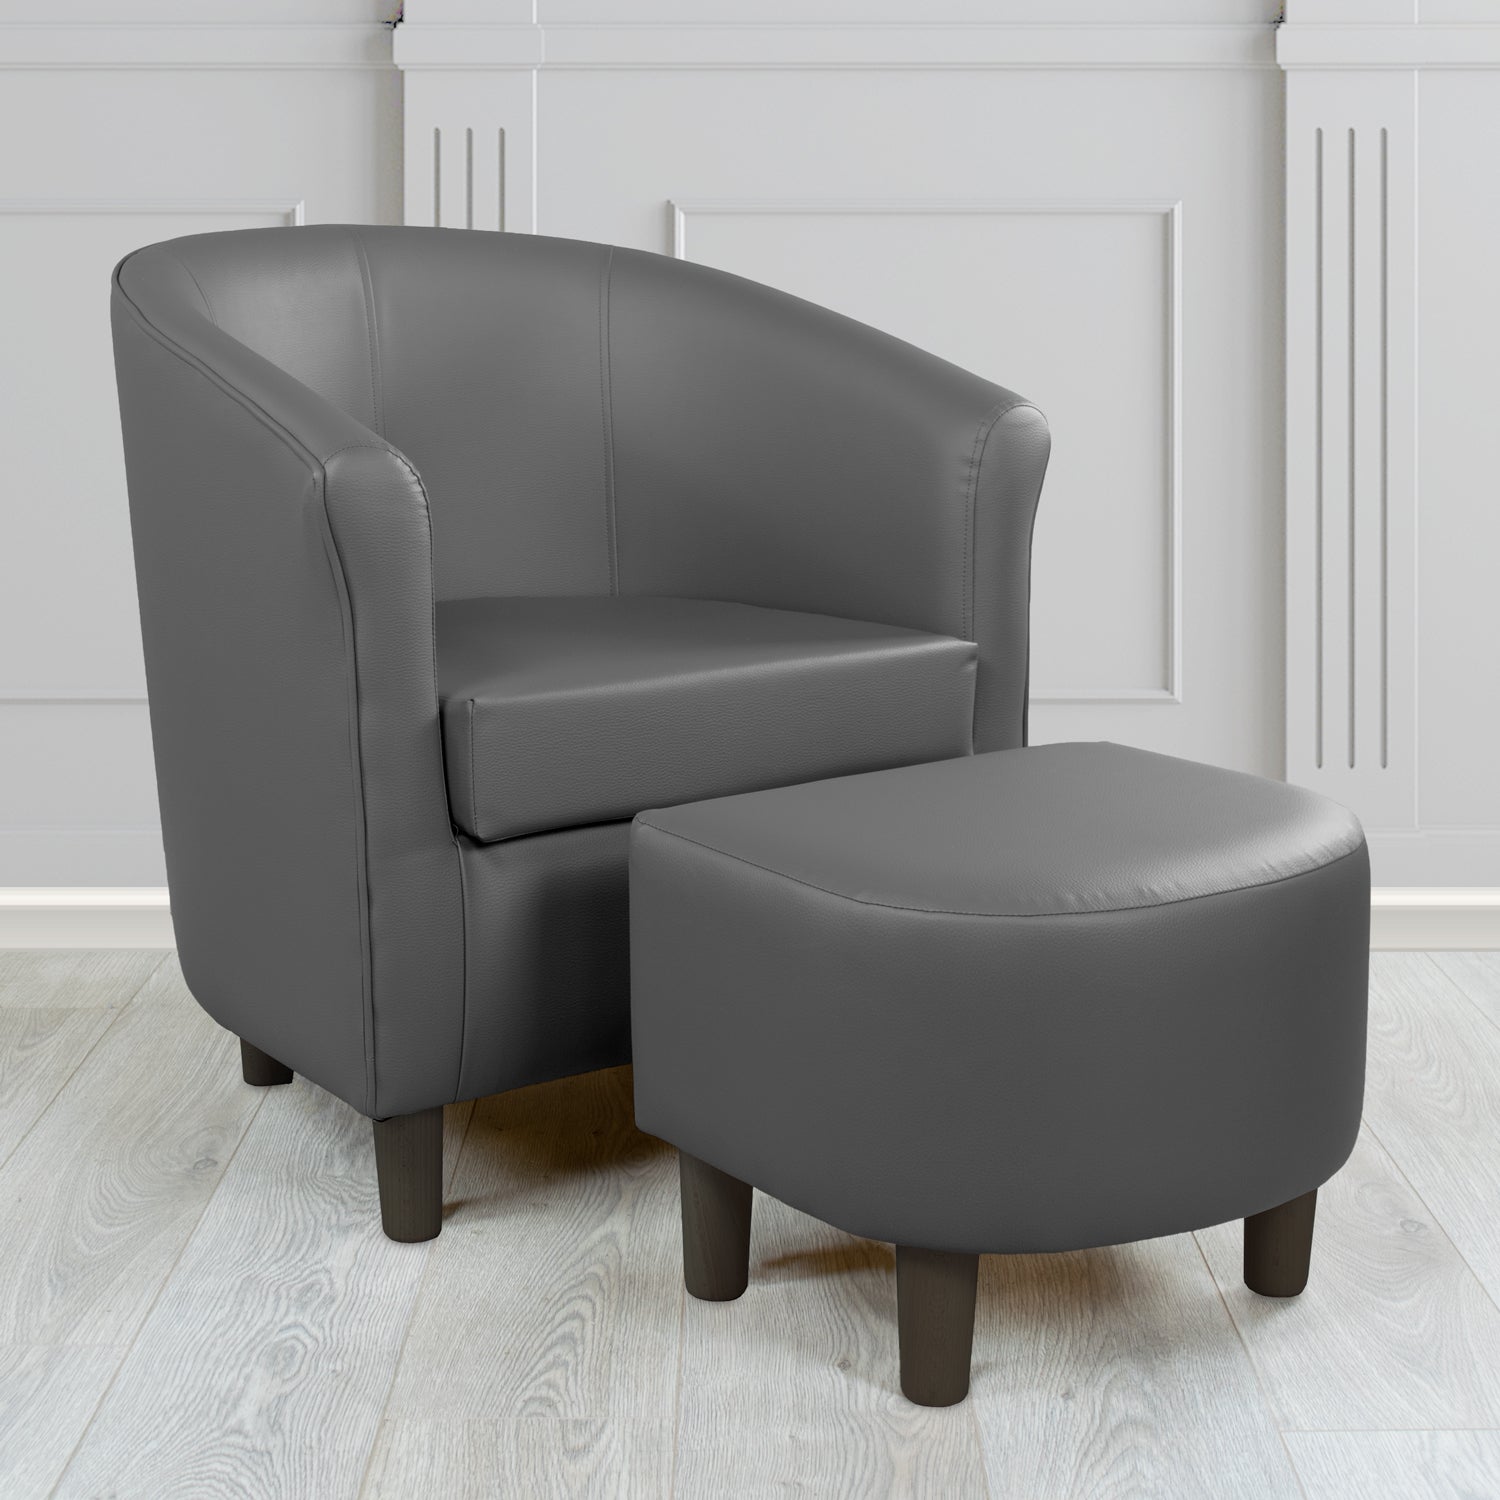 Tuscany Just Colour Gunmetal Grey Faux Leather Tub Chair with Dee Footstool Set - The Tub Chair Shop